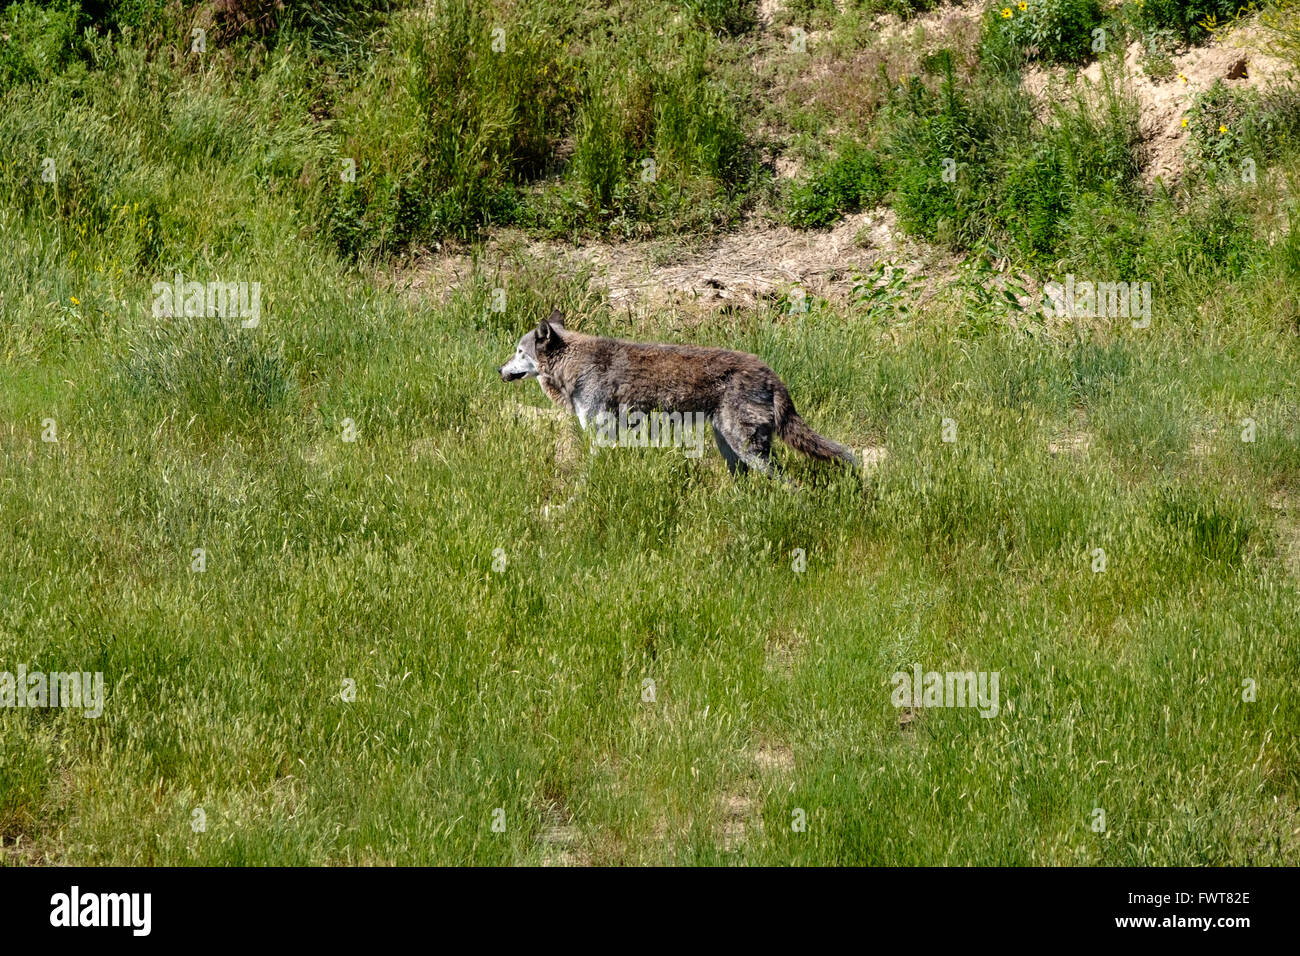 A grey wolf roams in his enclosure at the Wild Animal Sanctuary in Keenesburg, Colorado. Stock Photo